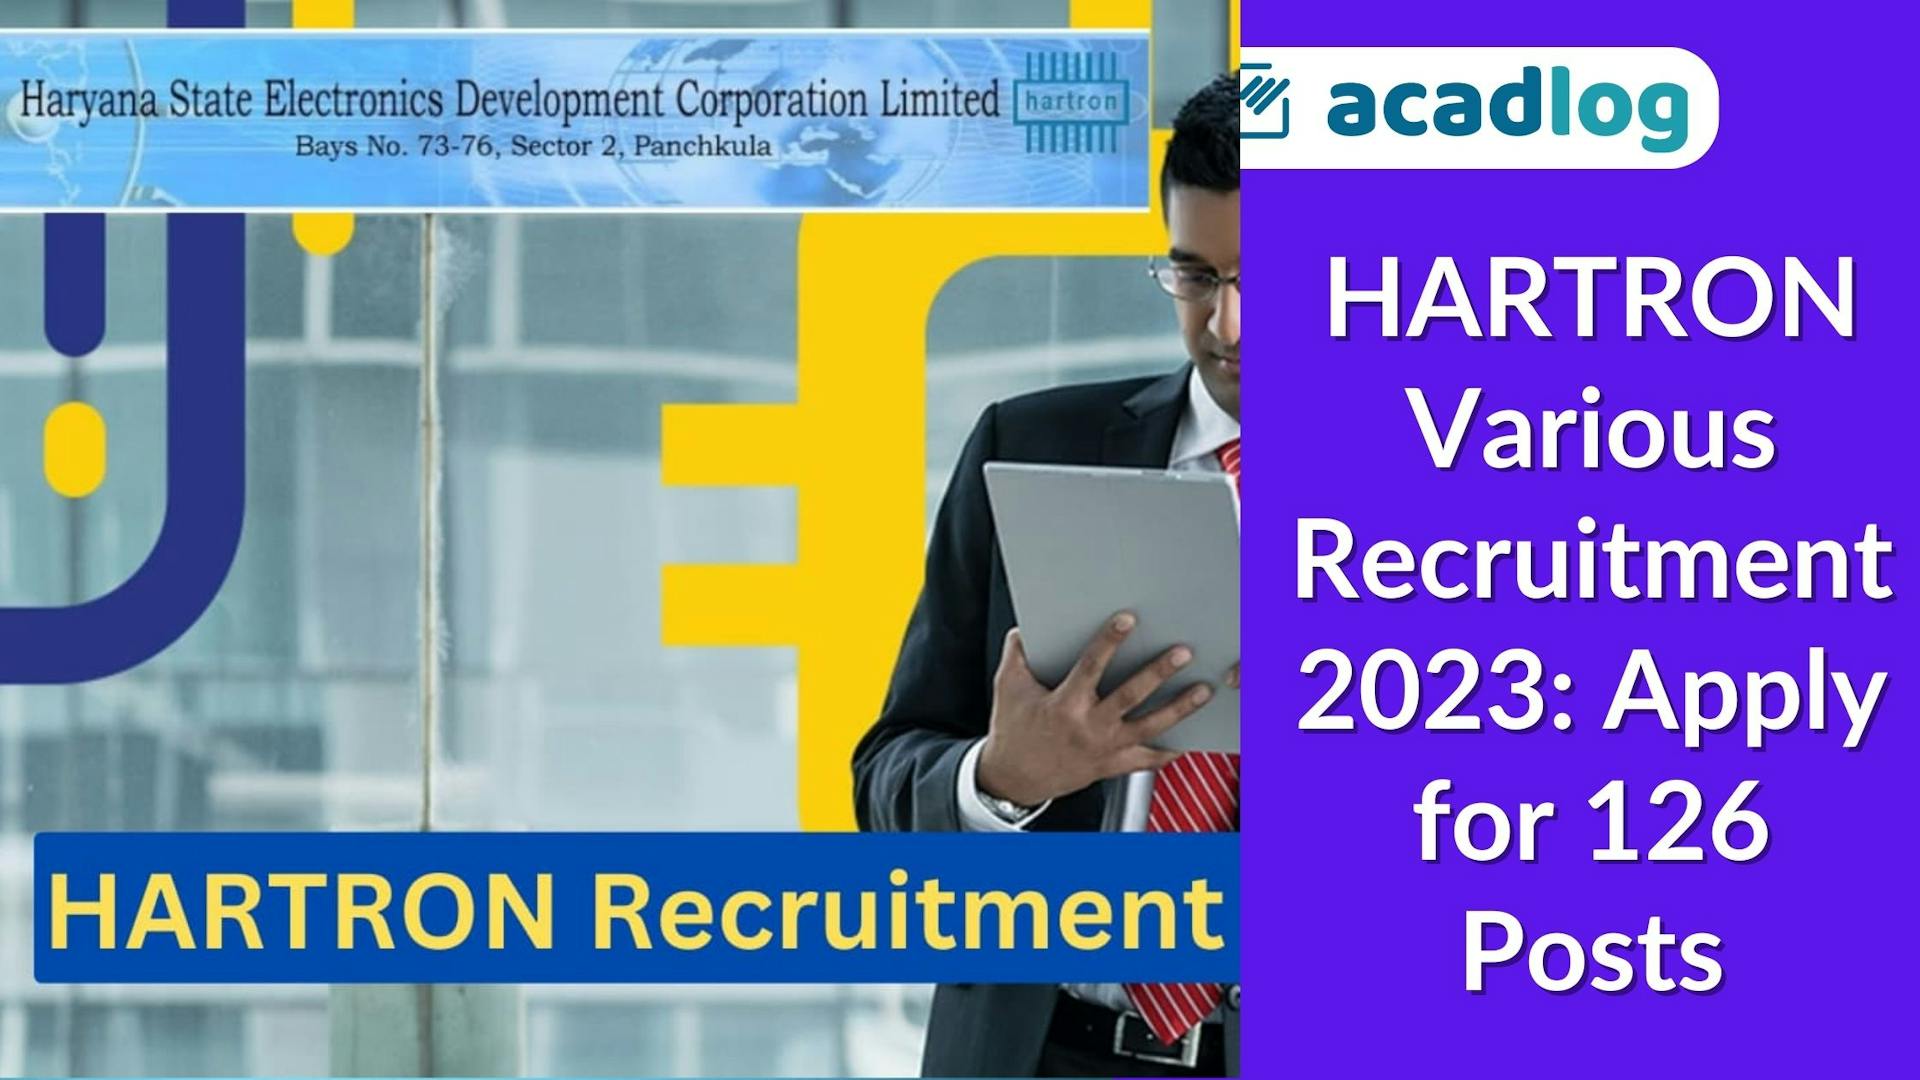 HARTRON Various Recruitment 2023: Apply for 126 Posts